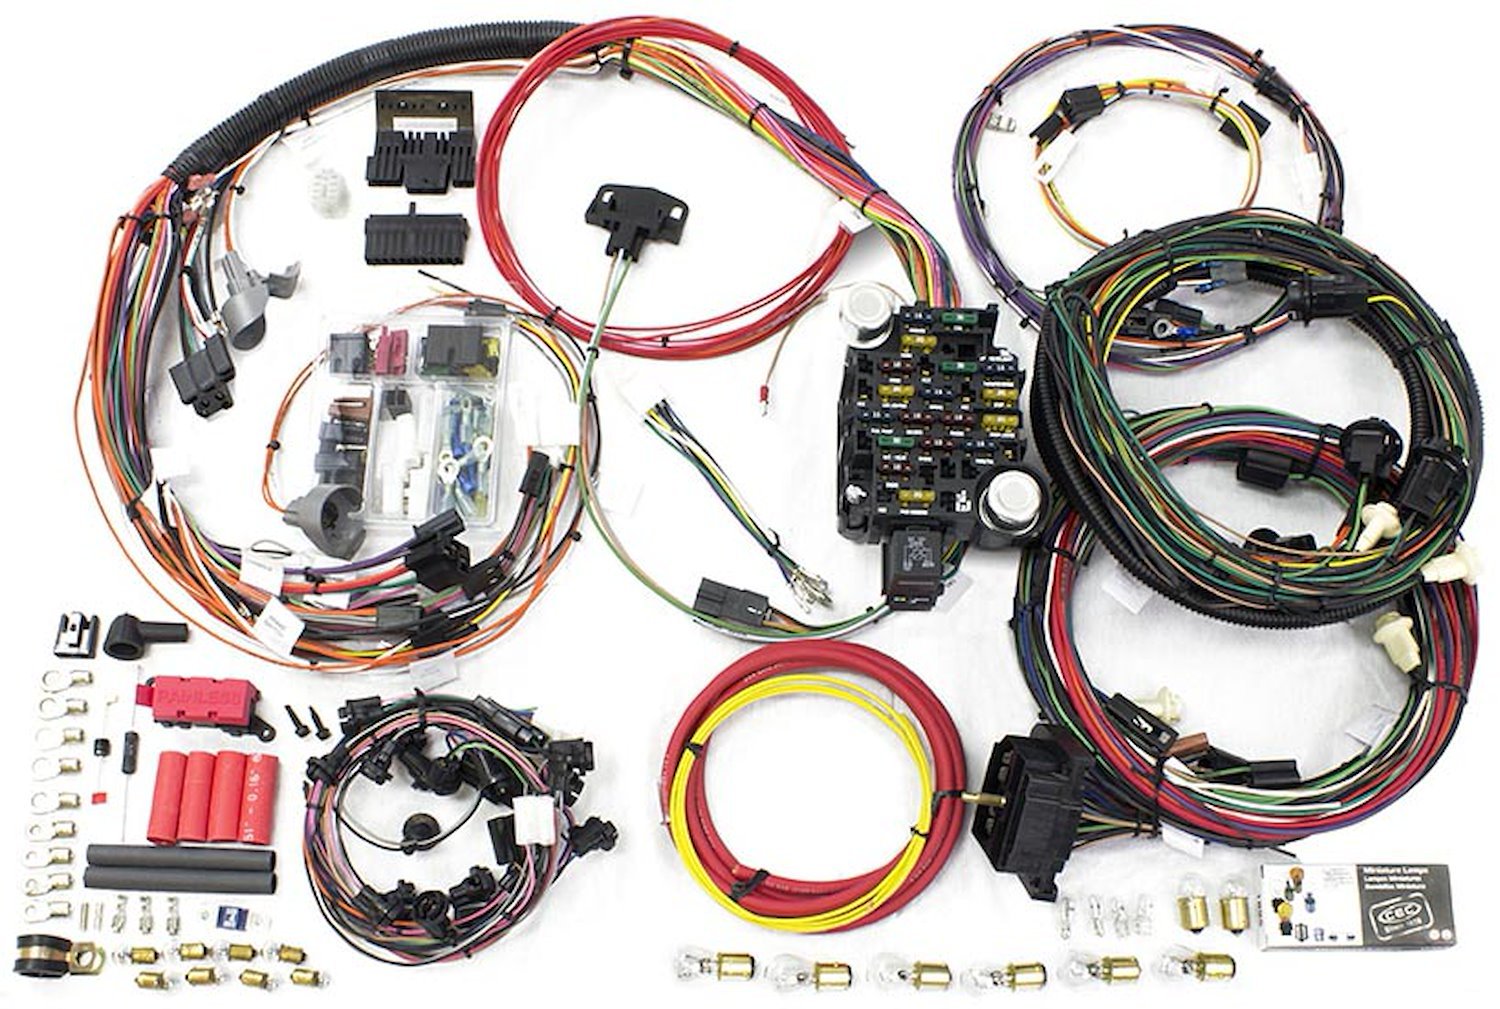 Direct-Fit 26-Circuit Wire Harness for 1969 Chevy Chevelle, Malibu